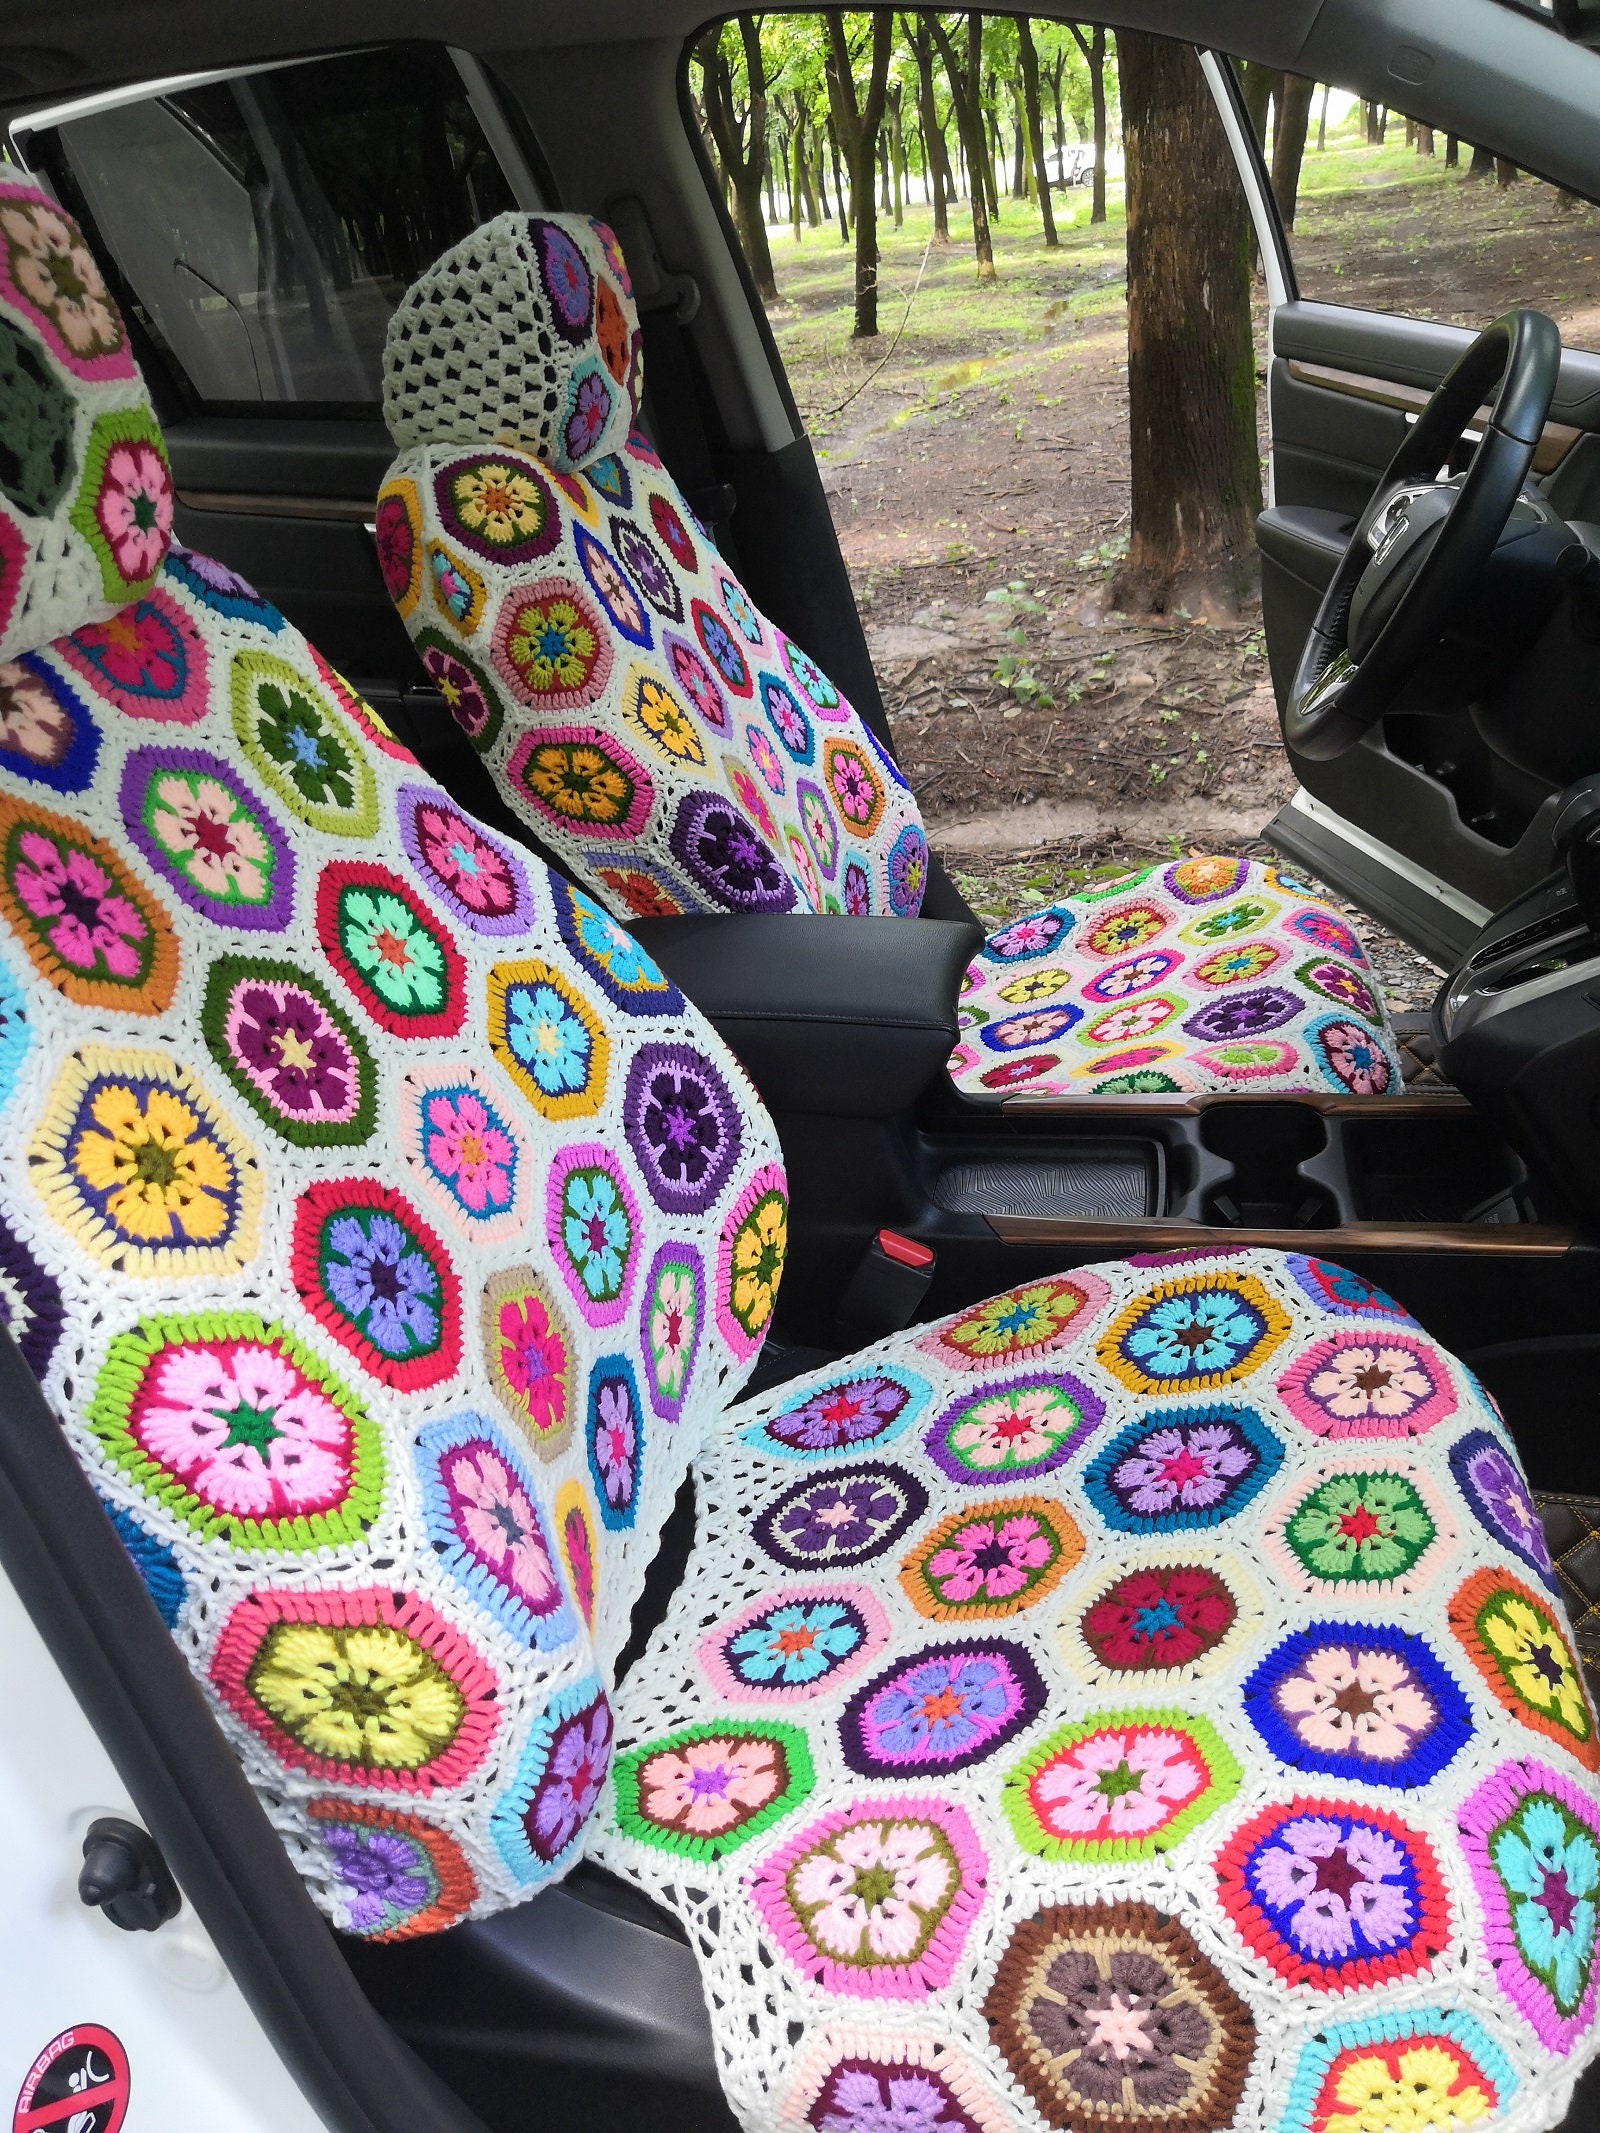 Car Seat Cover,crochet Seat Covers,rainbow Granny Square Steering Wheel Cover  Seat Cover Headrest Covers Car Accessories,car Interior Design 